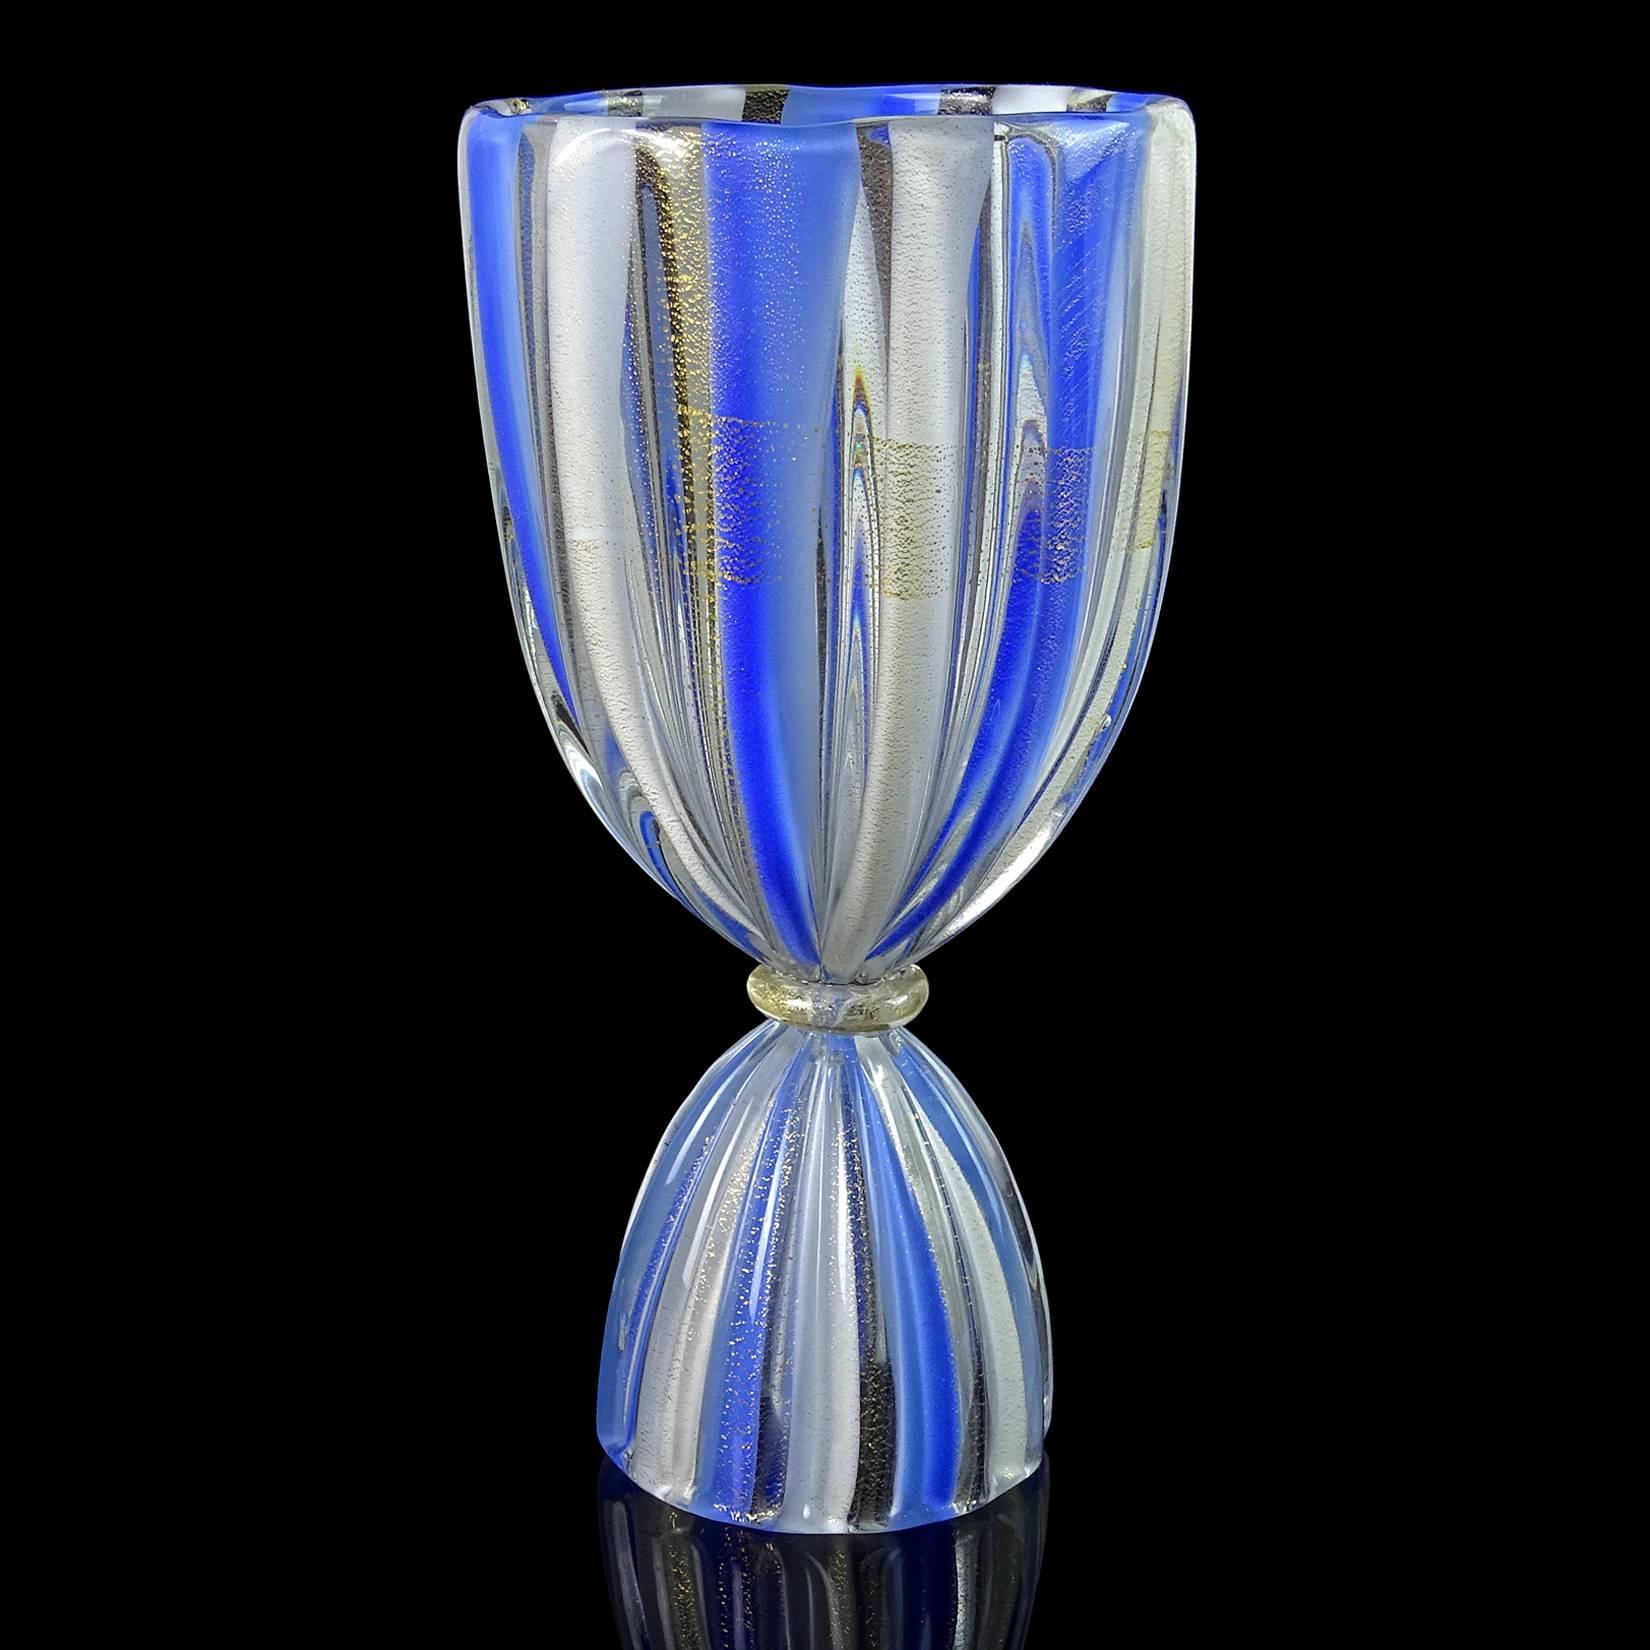 Murano hand blown blue, white and gold flecks Italian art glass corseted flower vase. Attributed to the Salviati Company, circa 1950s. It can be turned up-side-down giving it a different design all together. Very unique piece. Measures: 9 5/8